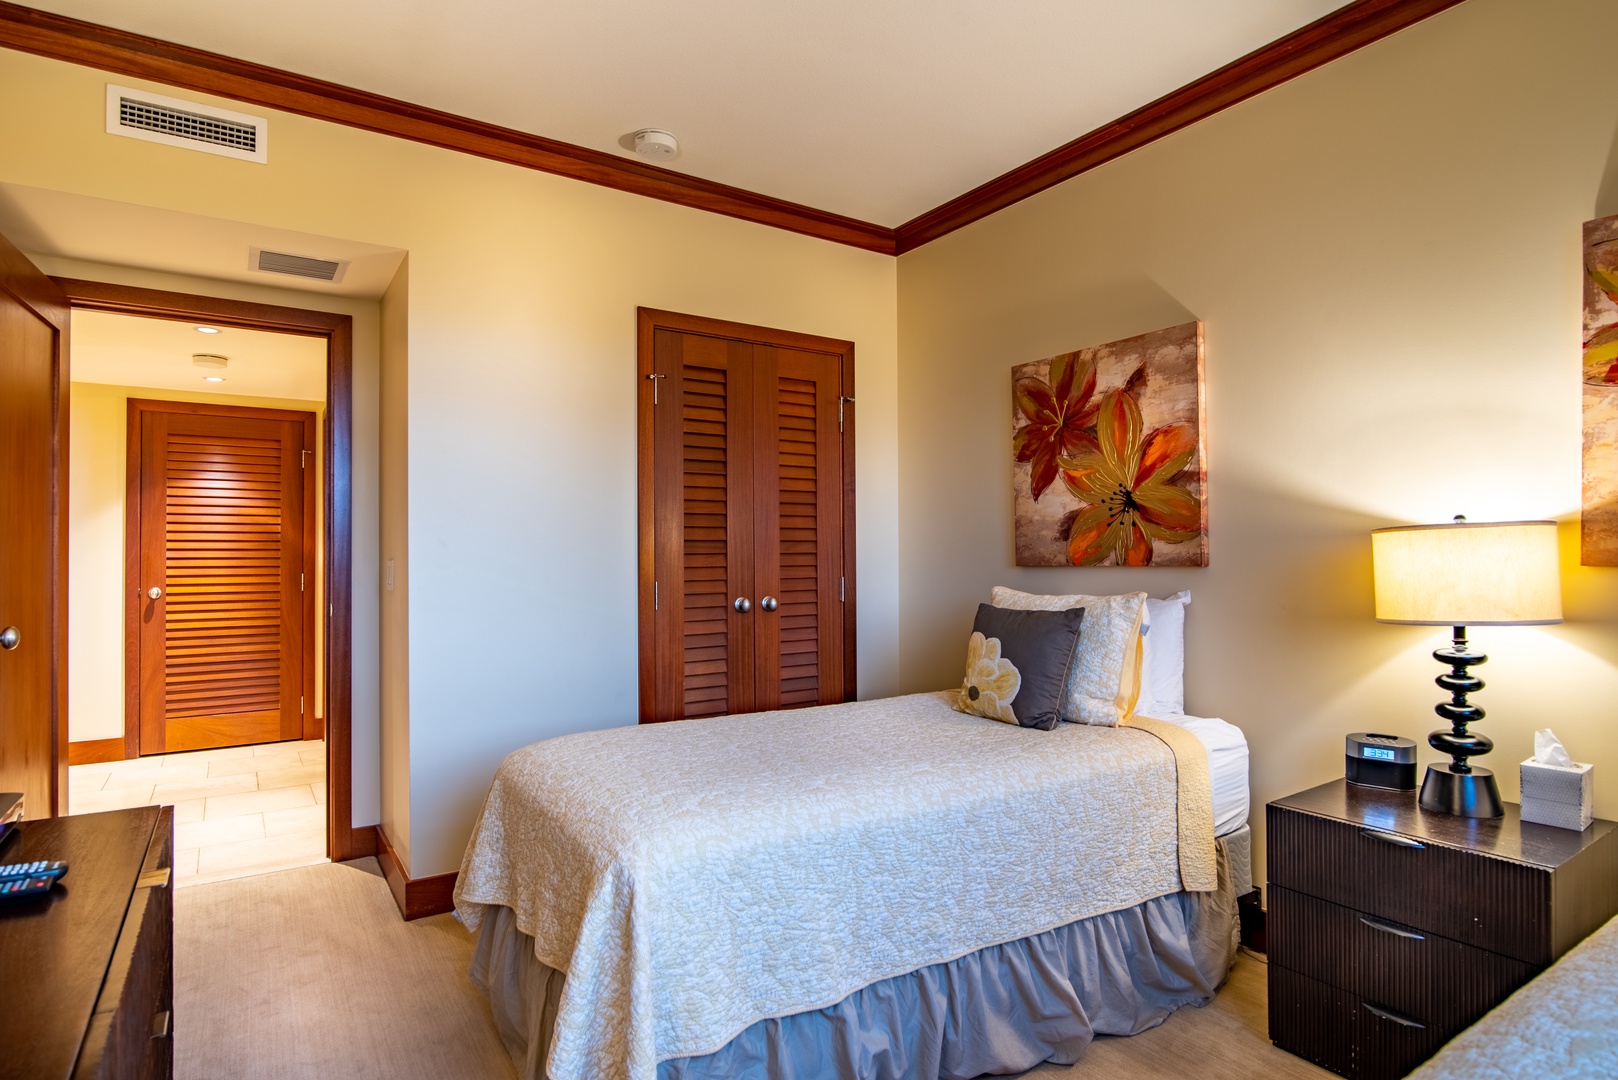 Kapolei Vacation Rentals, Ko Olina Beach Villas B505 - The twin beds can be converted to a king.